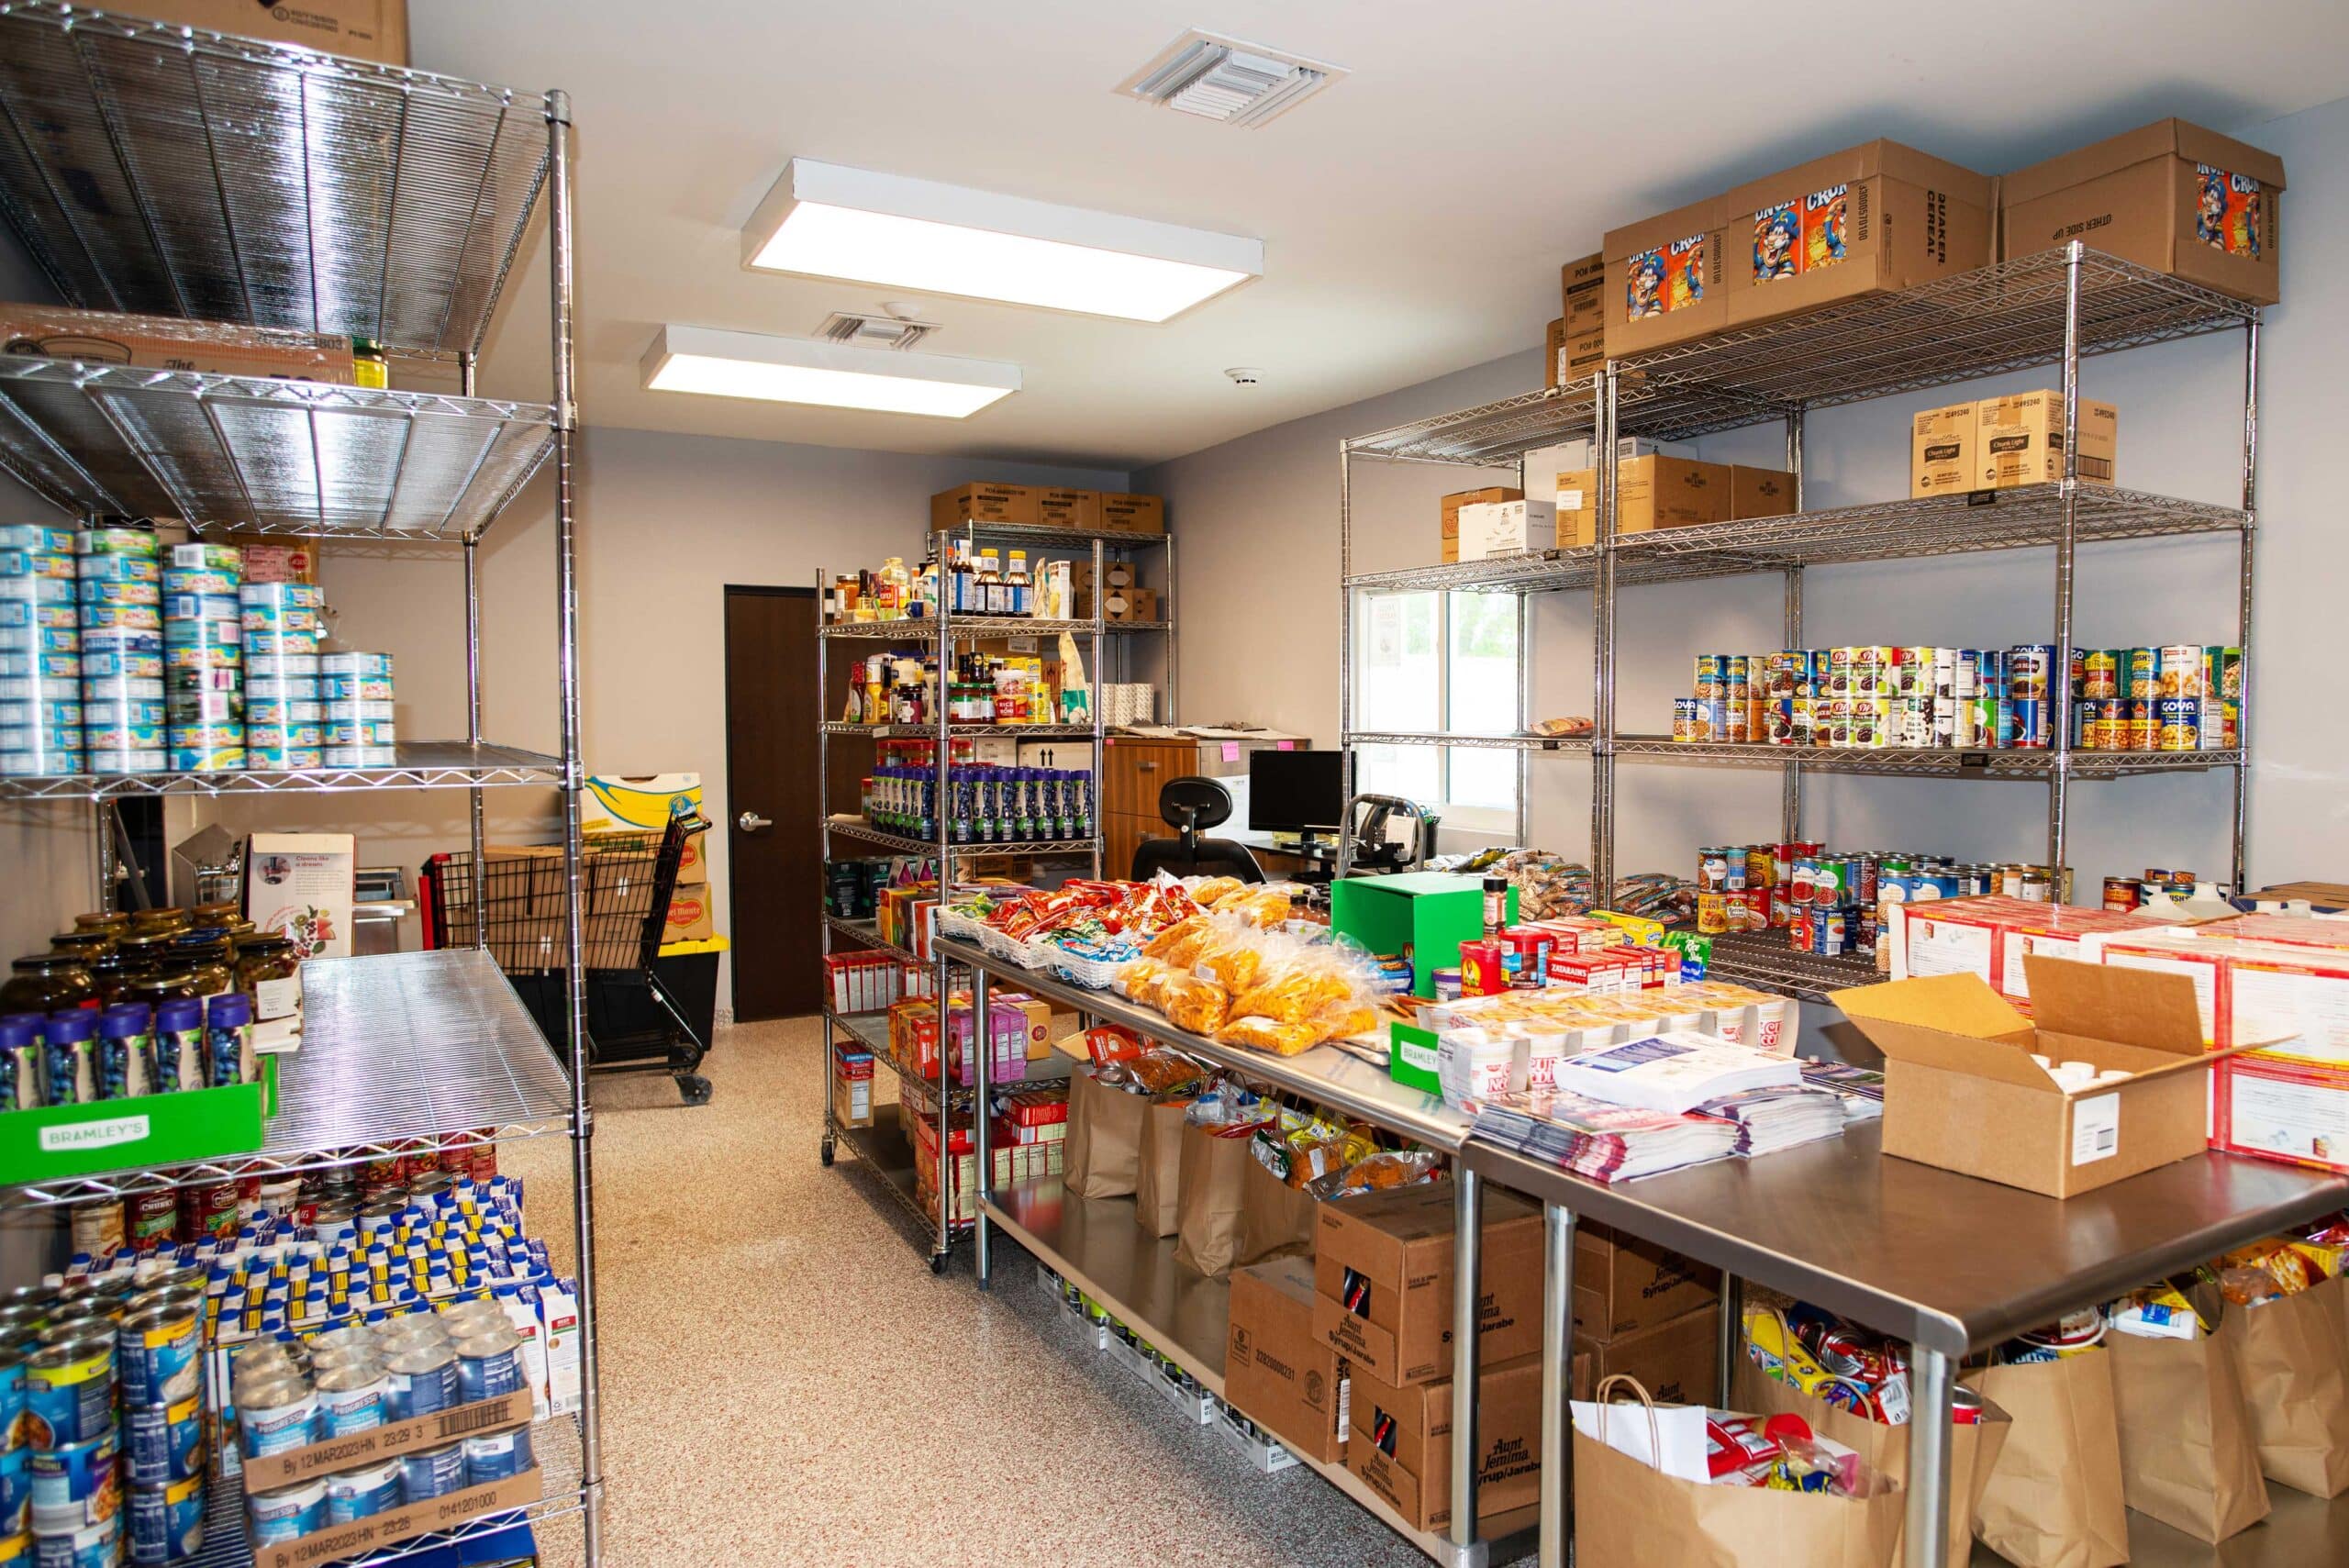 Salvation Army Pantry and Office Renovation